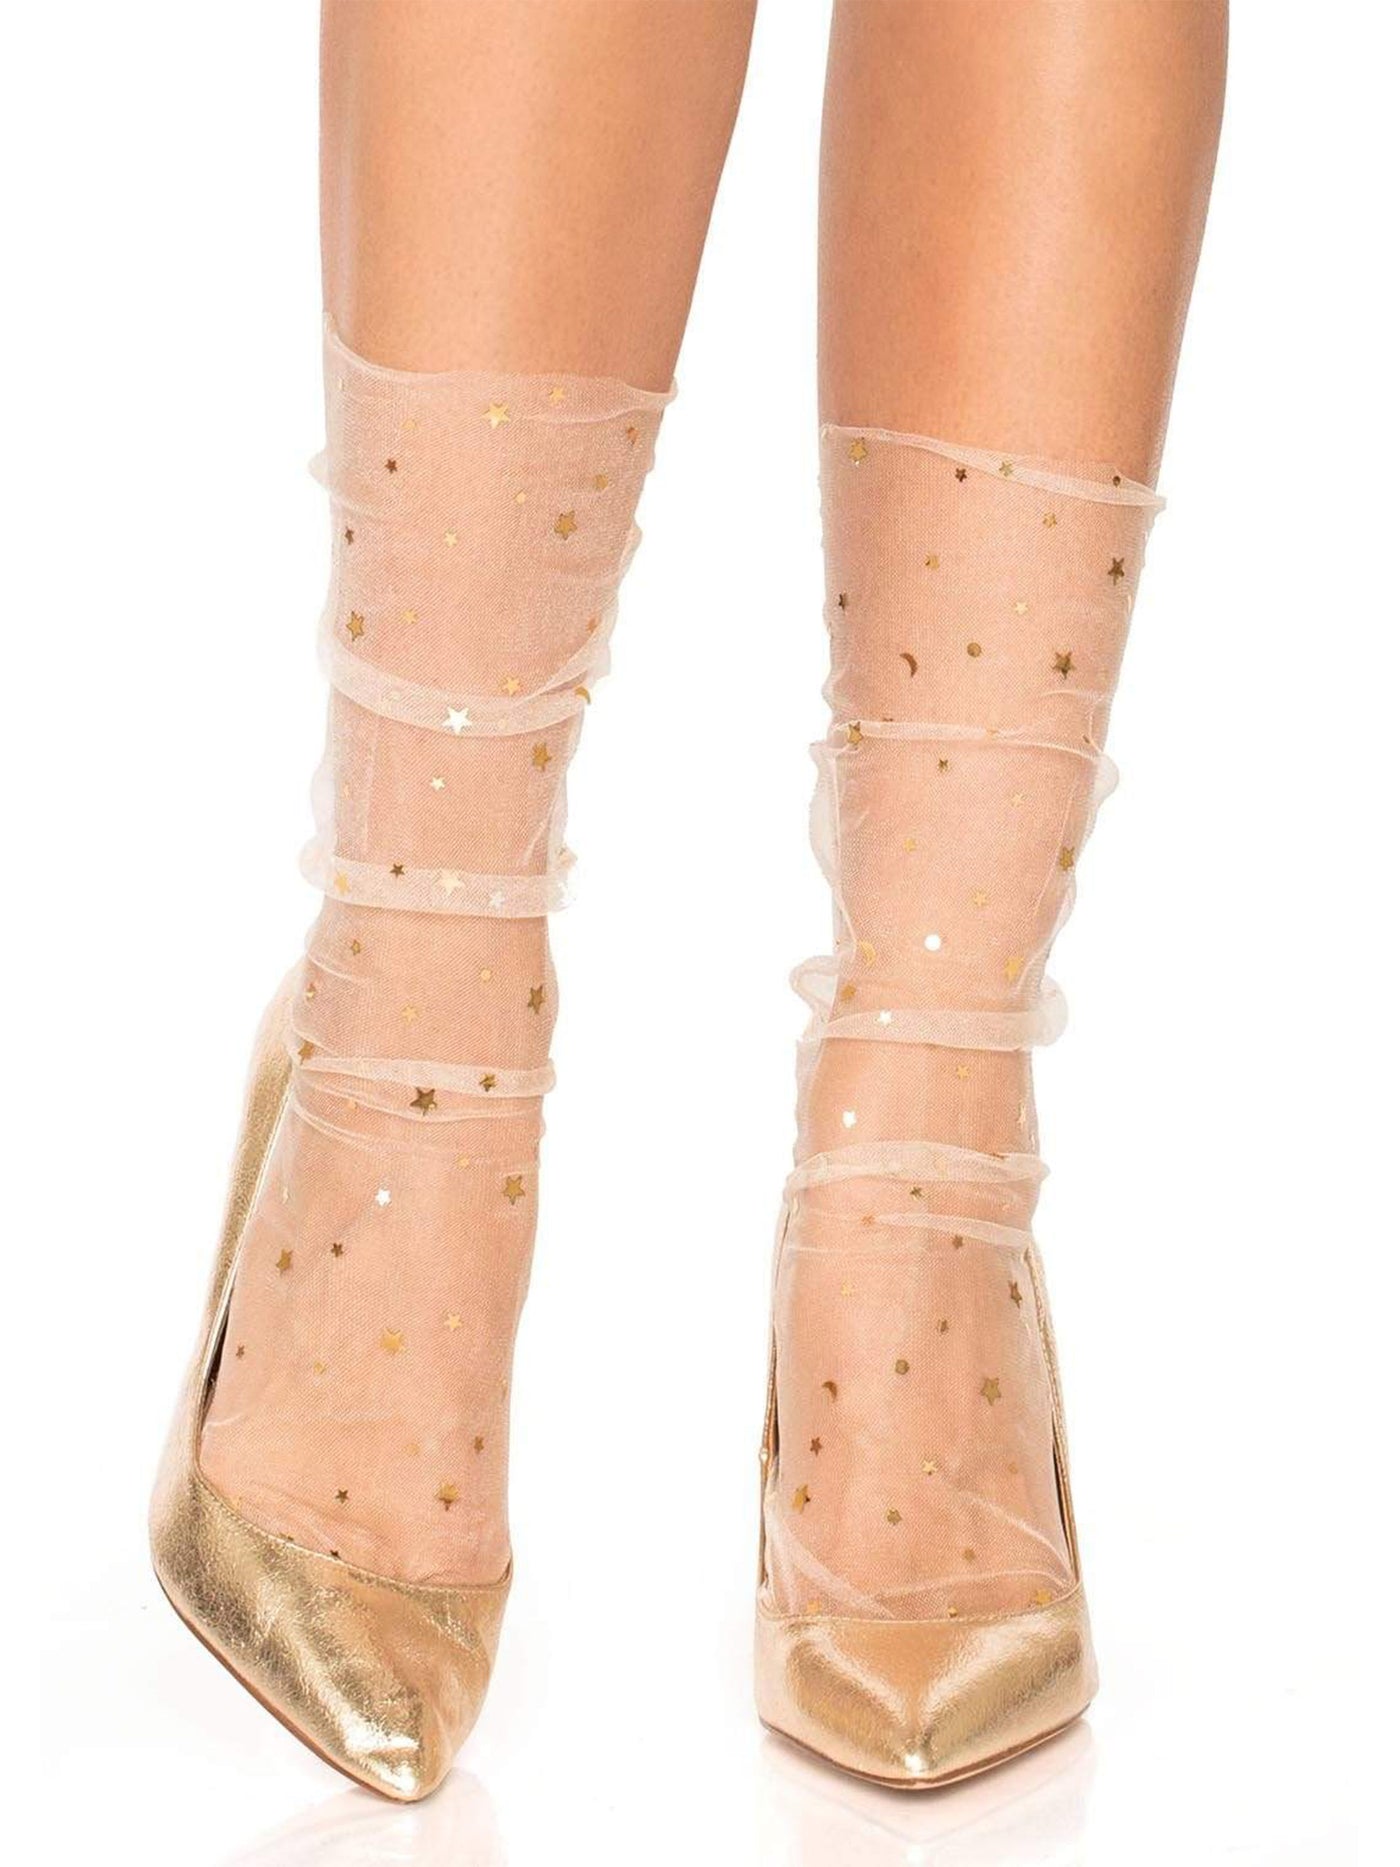 Starzy Sheer Tulle Star and Moon Socks in Cream